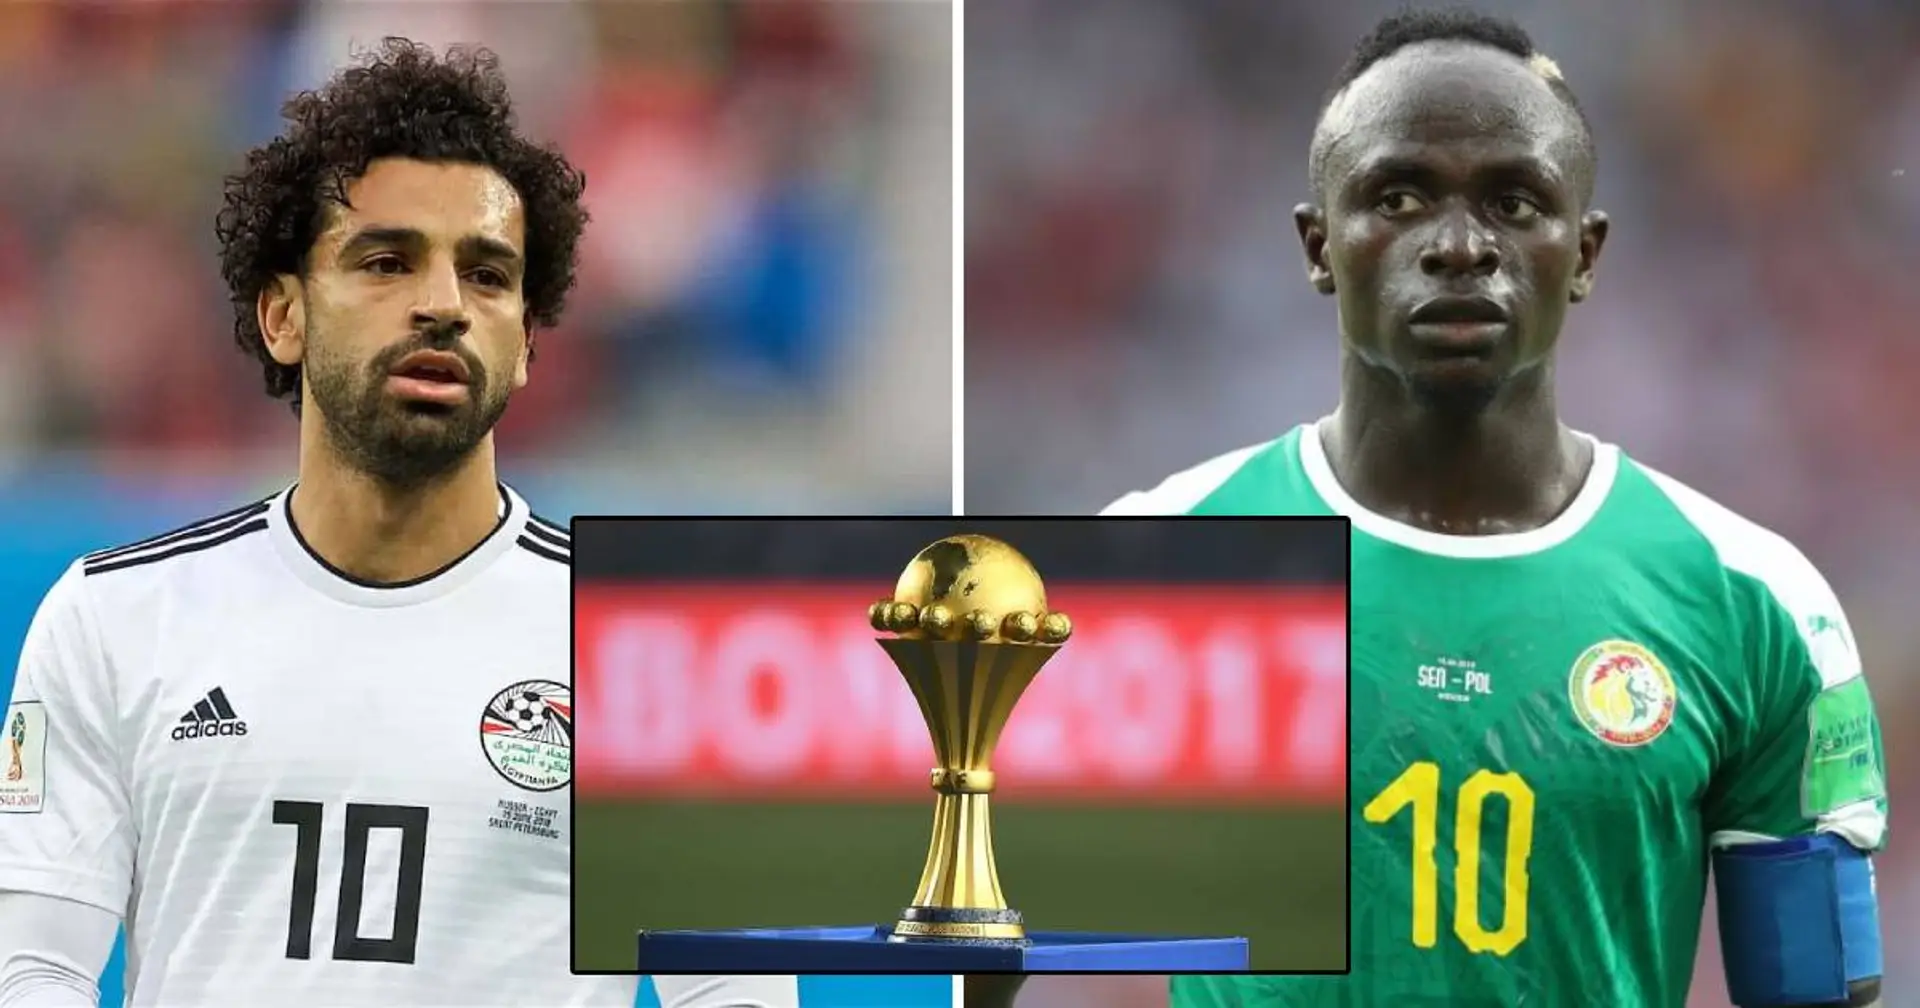 AFCON 2022 may be postponed as group stage draw is delayed - here's what it means for Liverpool